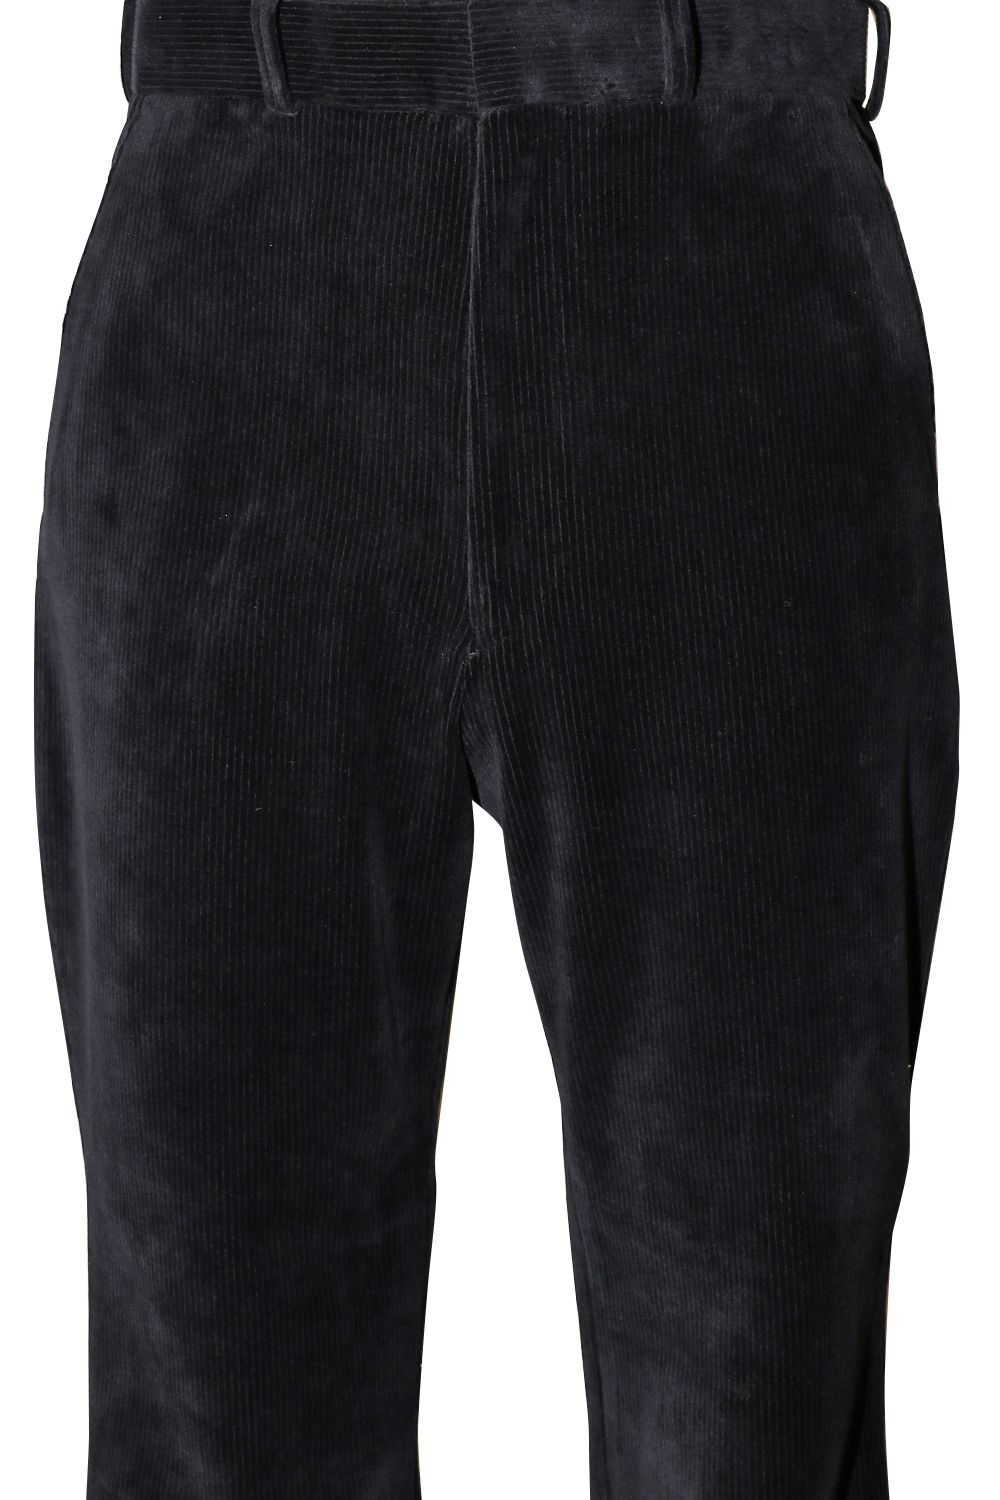 N.HOOLYWOOD - N.HOOLYWOOD COMPILE FLARE TROUSERS ...